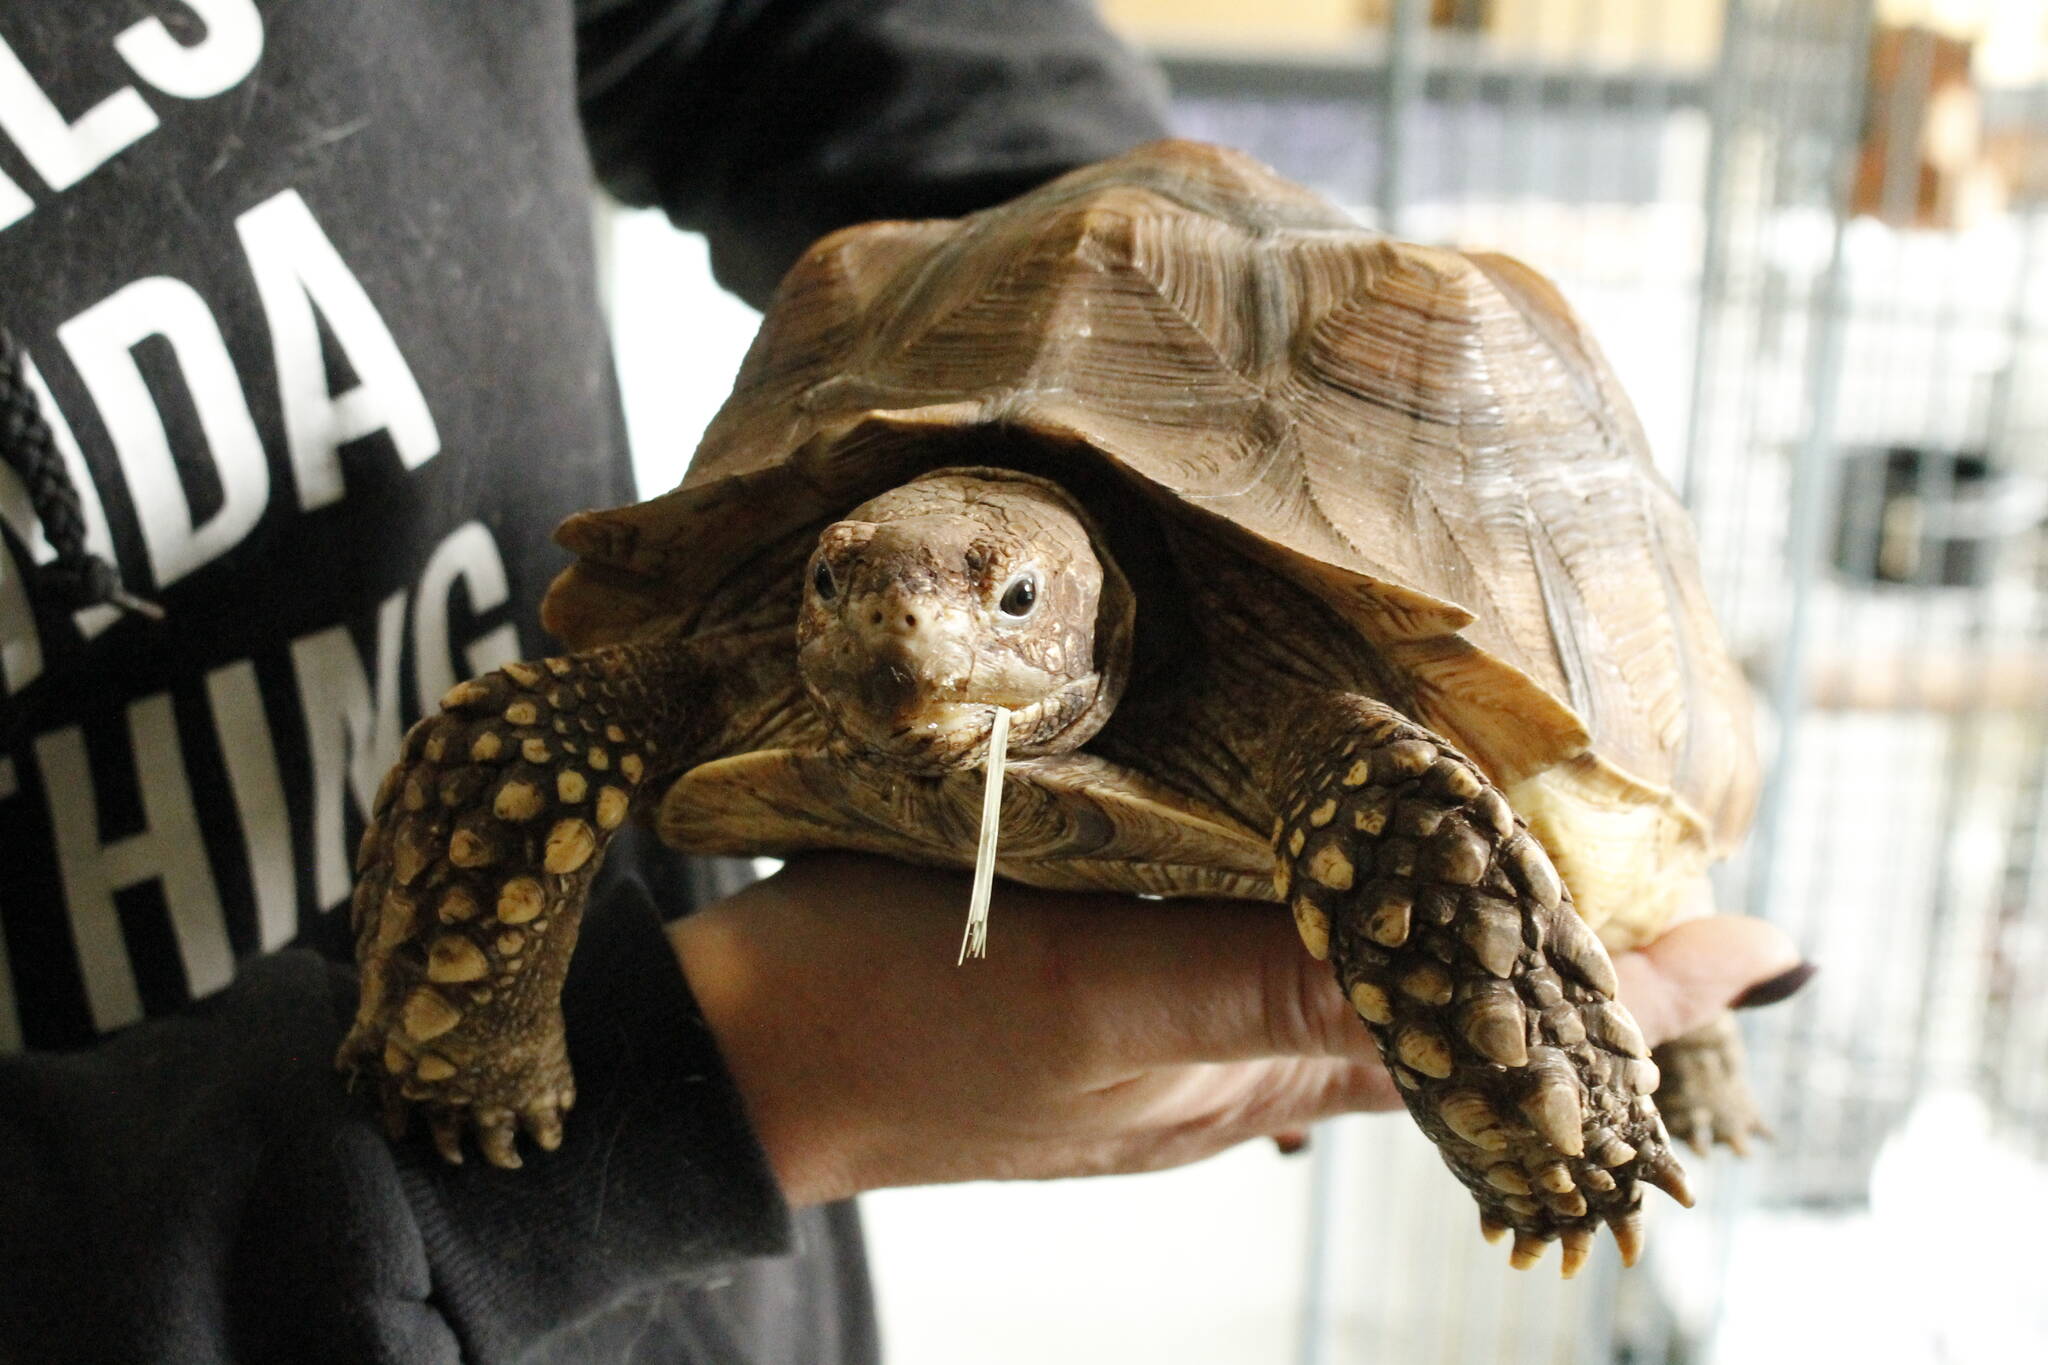 Photos by Kira Erickson/South Whidbey Record
Critters & Co. Pet Center is home to a wide variety of unusual animals, such as this tortoise named Max. A community member recently started a fundraiser benefitting the store, which rescues animals at high costs.